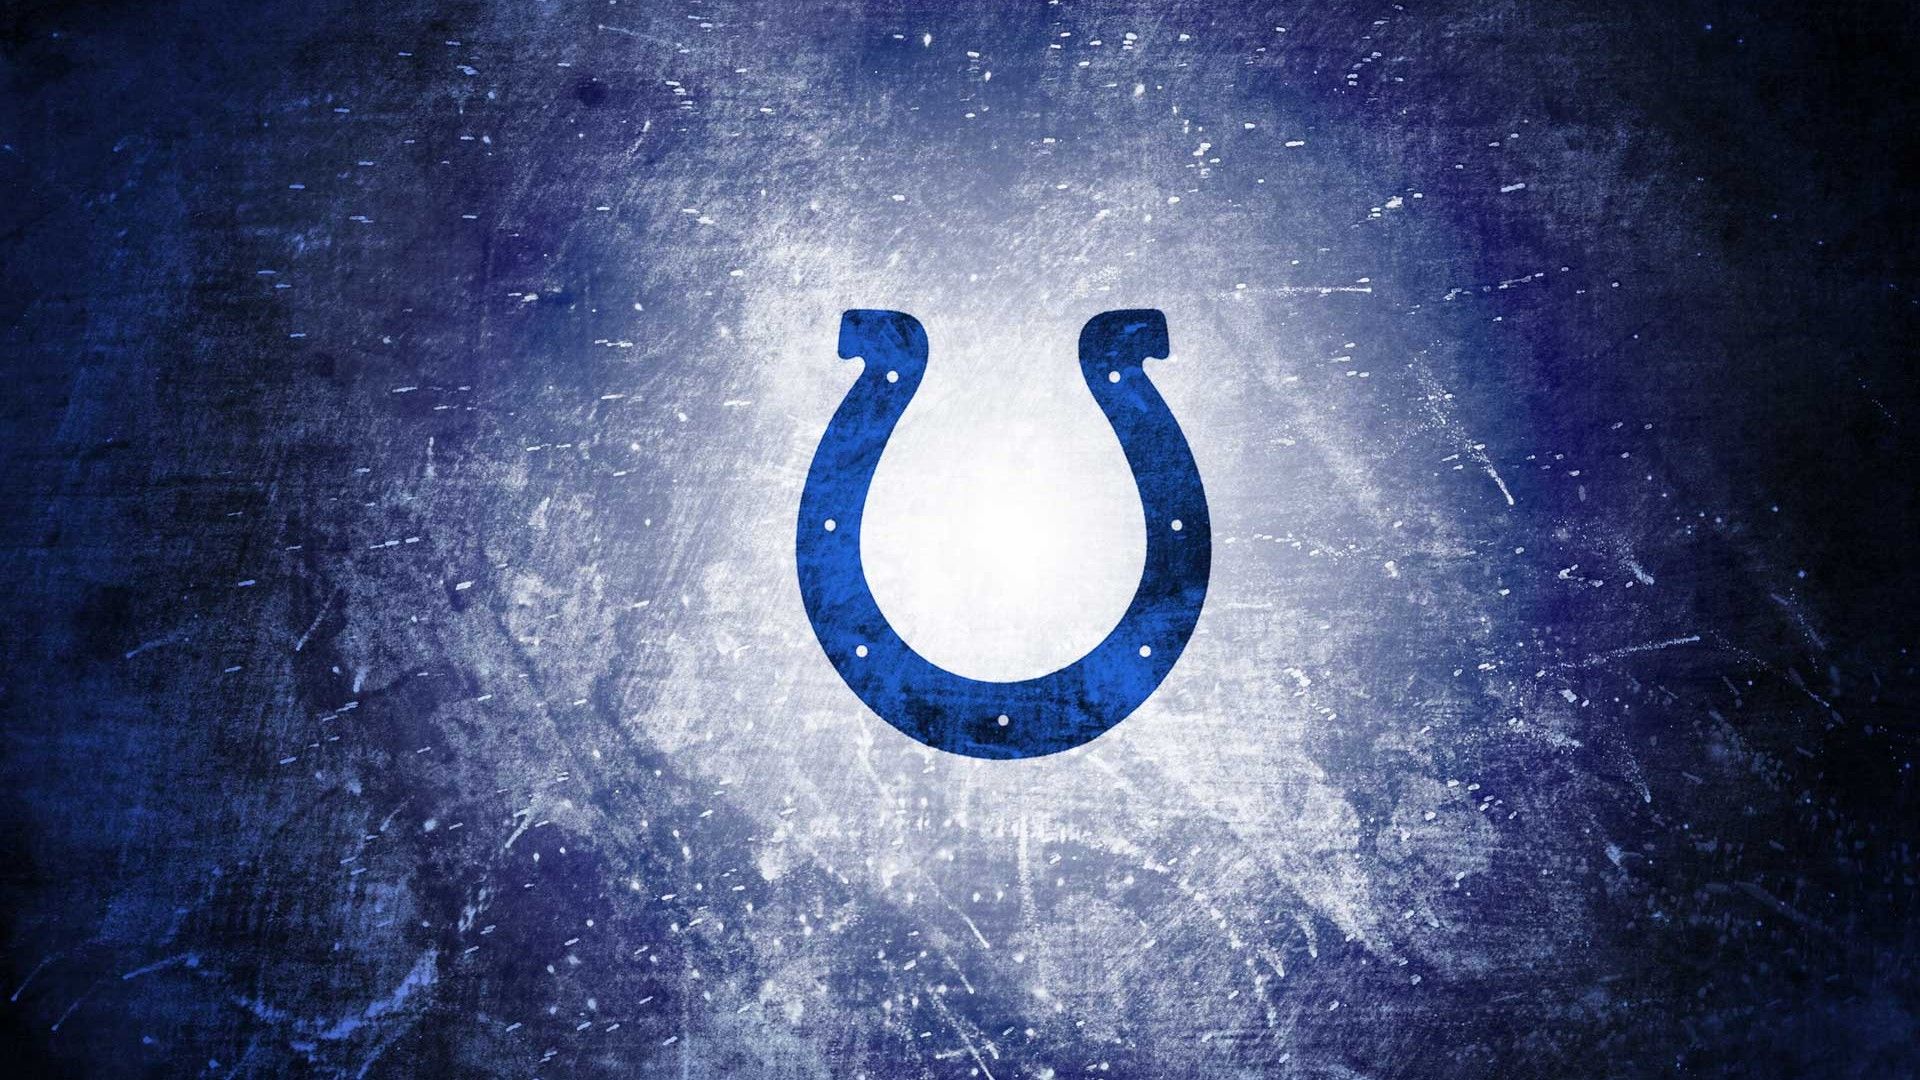 Indianapolis Colts Wallpaper For Mac Background NFL Football Wallpaper